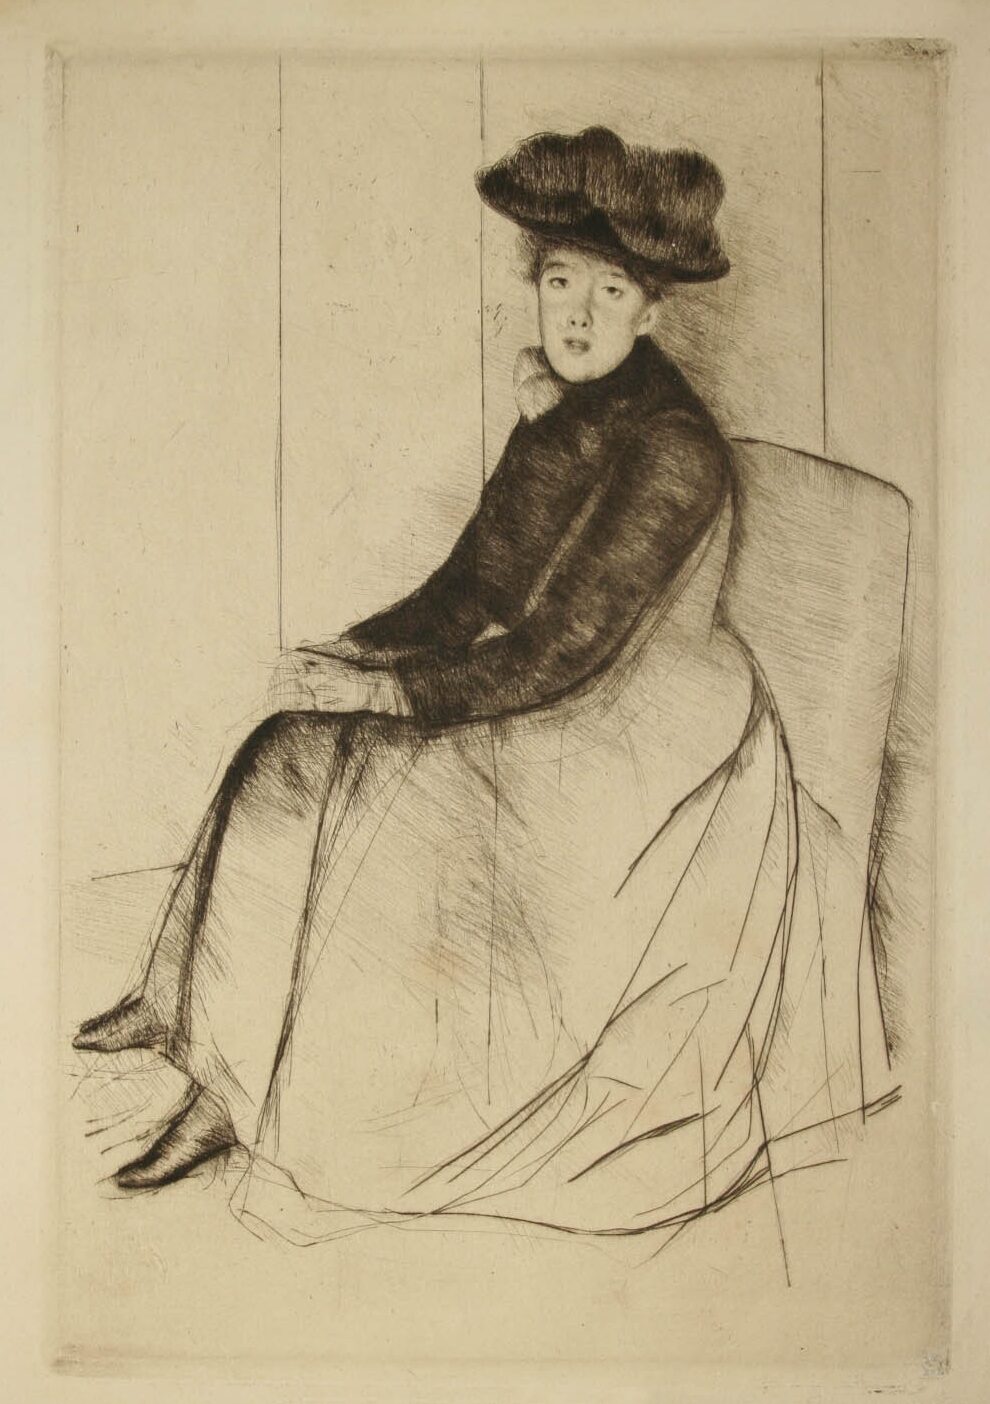 Mary Cassatt (American, 1844-1926), Reflection, ca. 1890, drypoint. Museums Collections